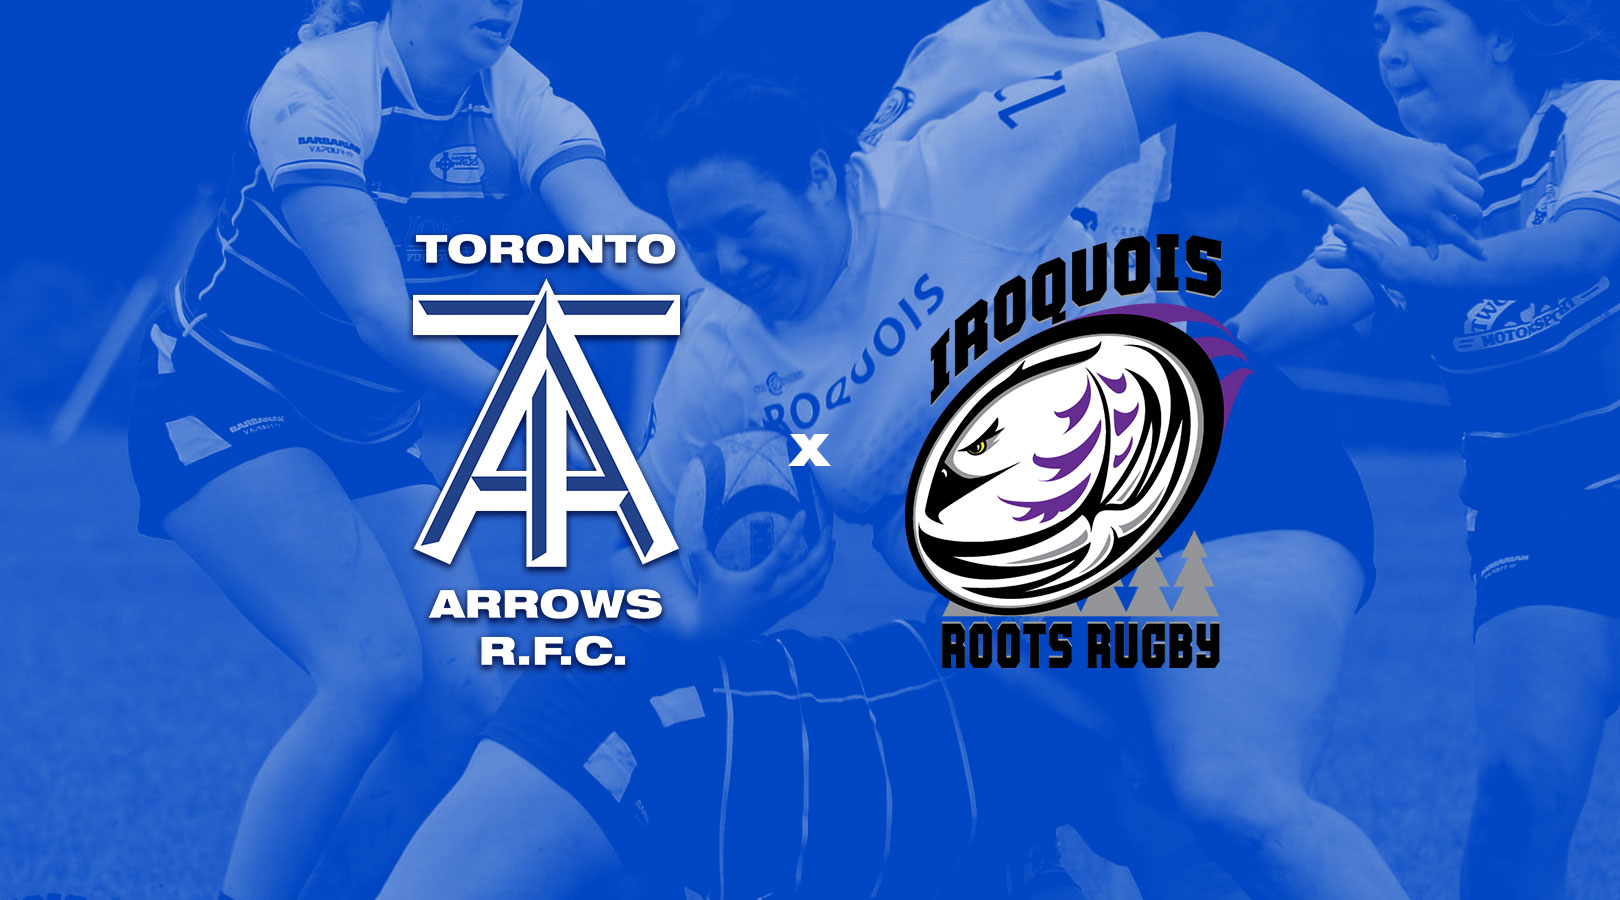 Toronto Arrows Announce Partnership with Iroquois Roots Rugby